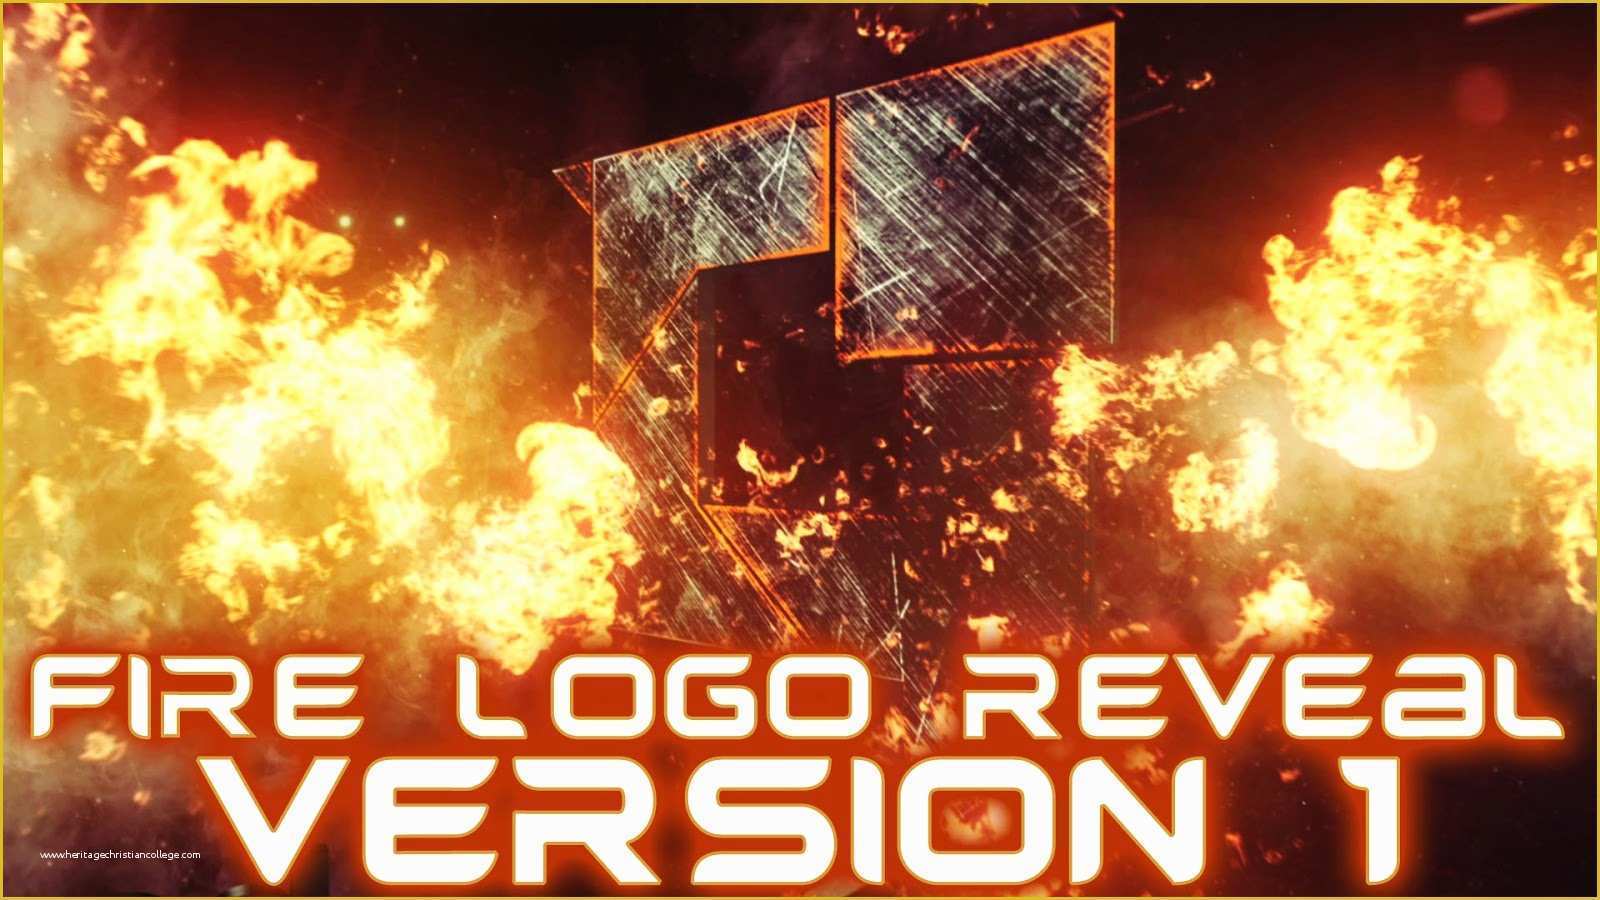 Fire Template after Effects Free Of after Effects Template Fire Logo Reveal V1 Gosharemore